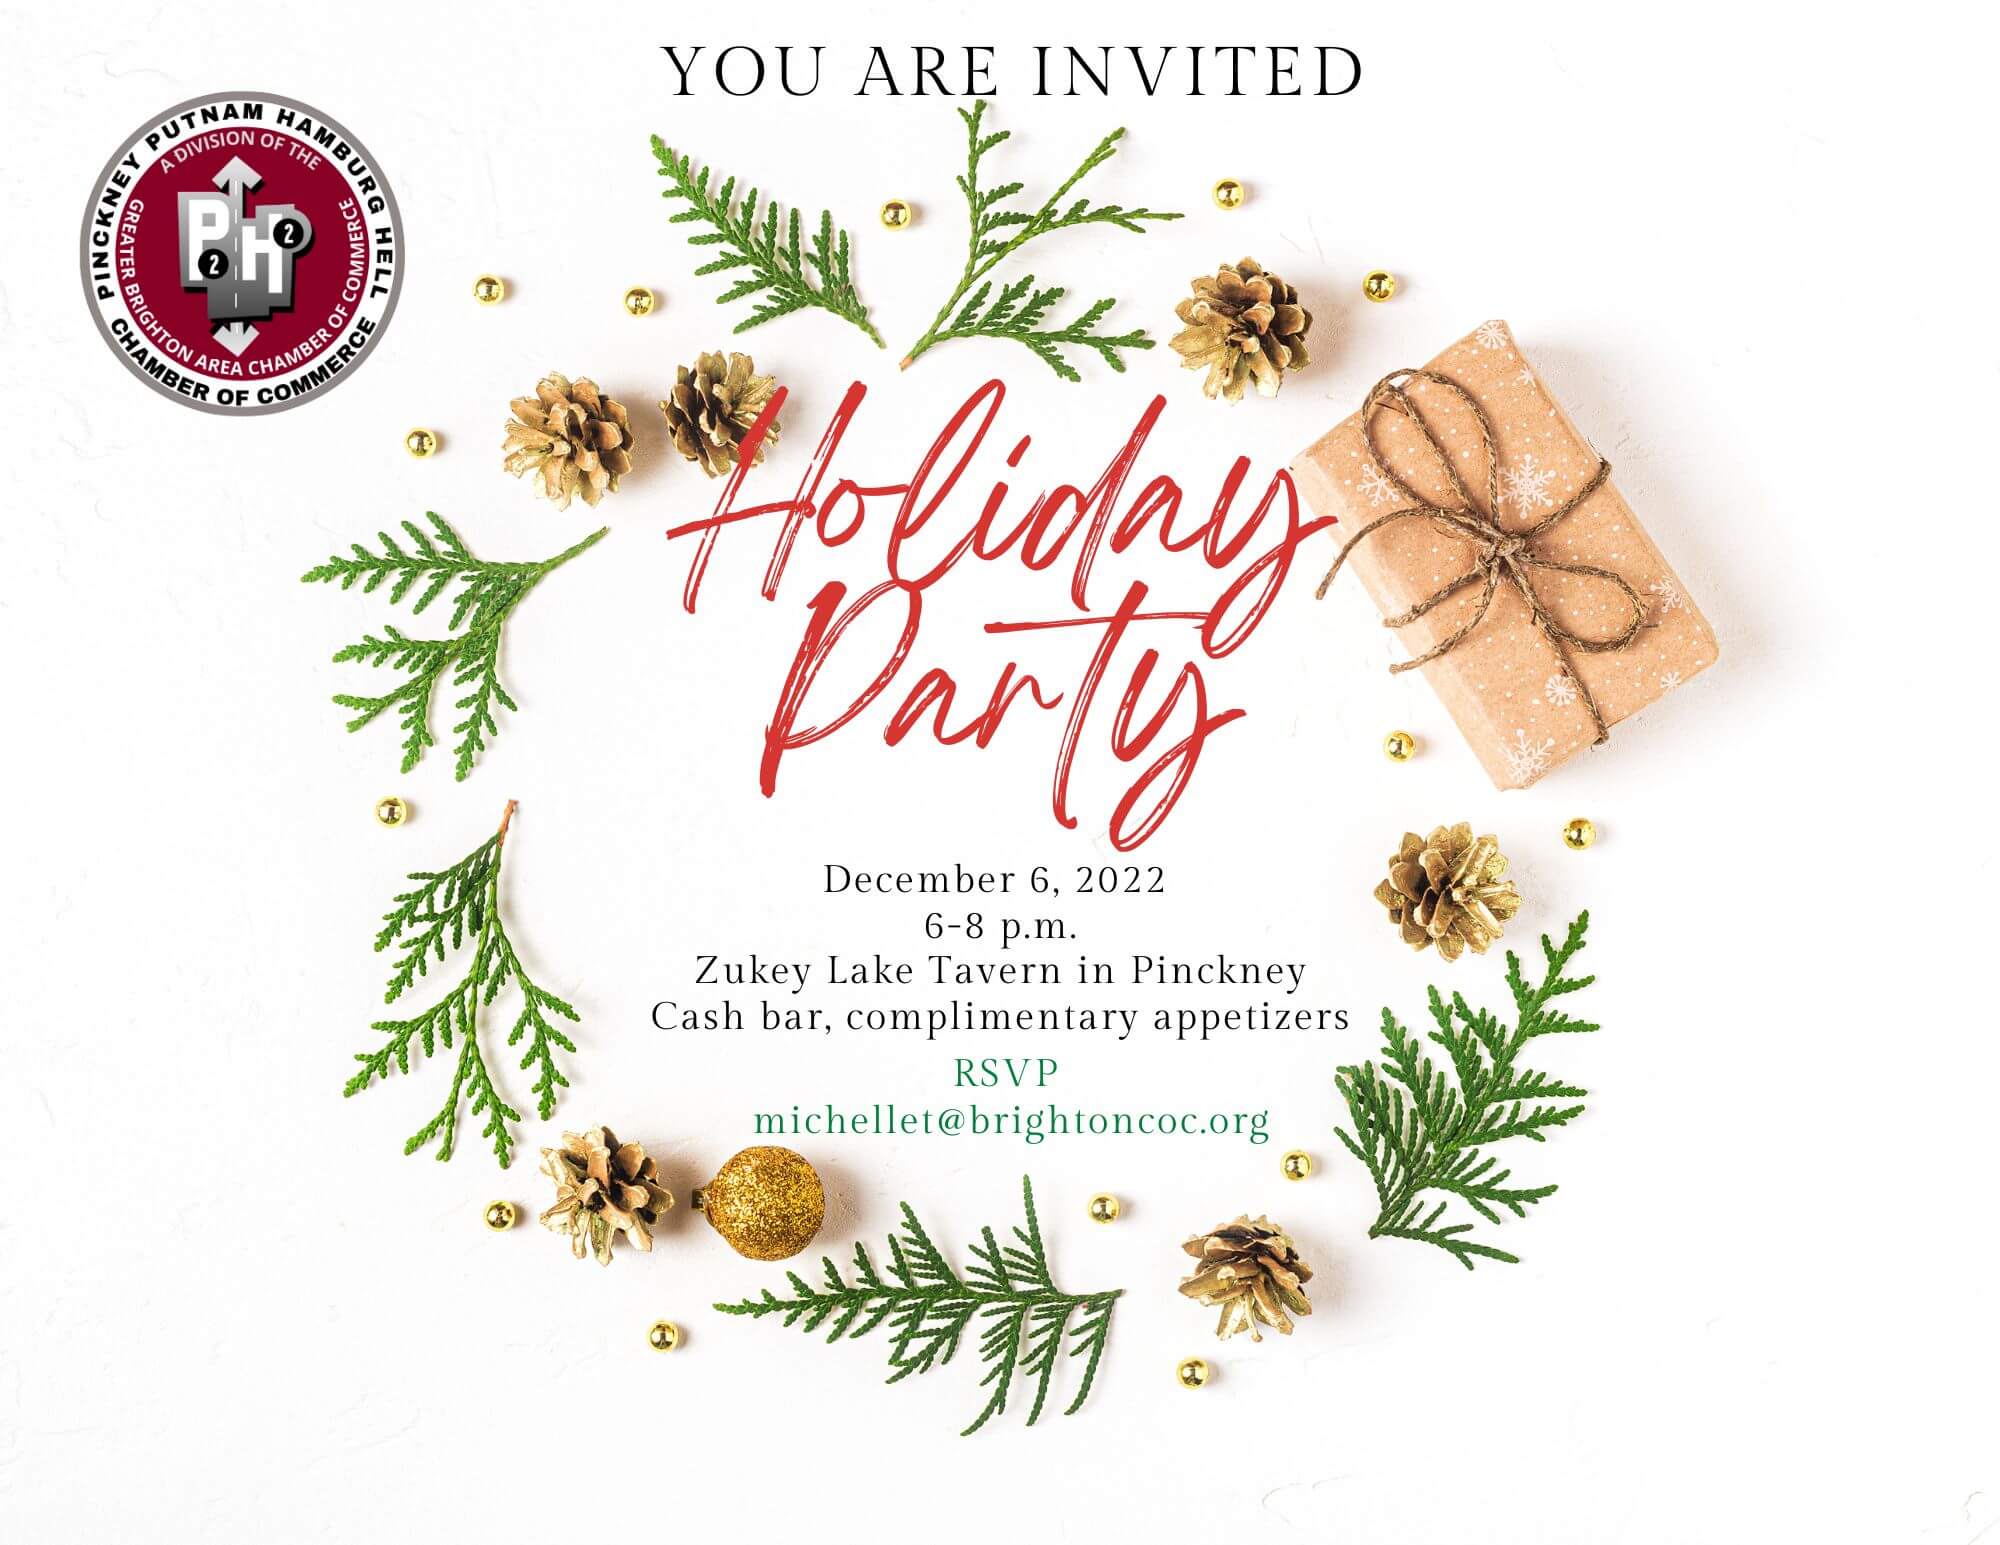 PPHH Holiday Party